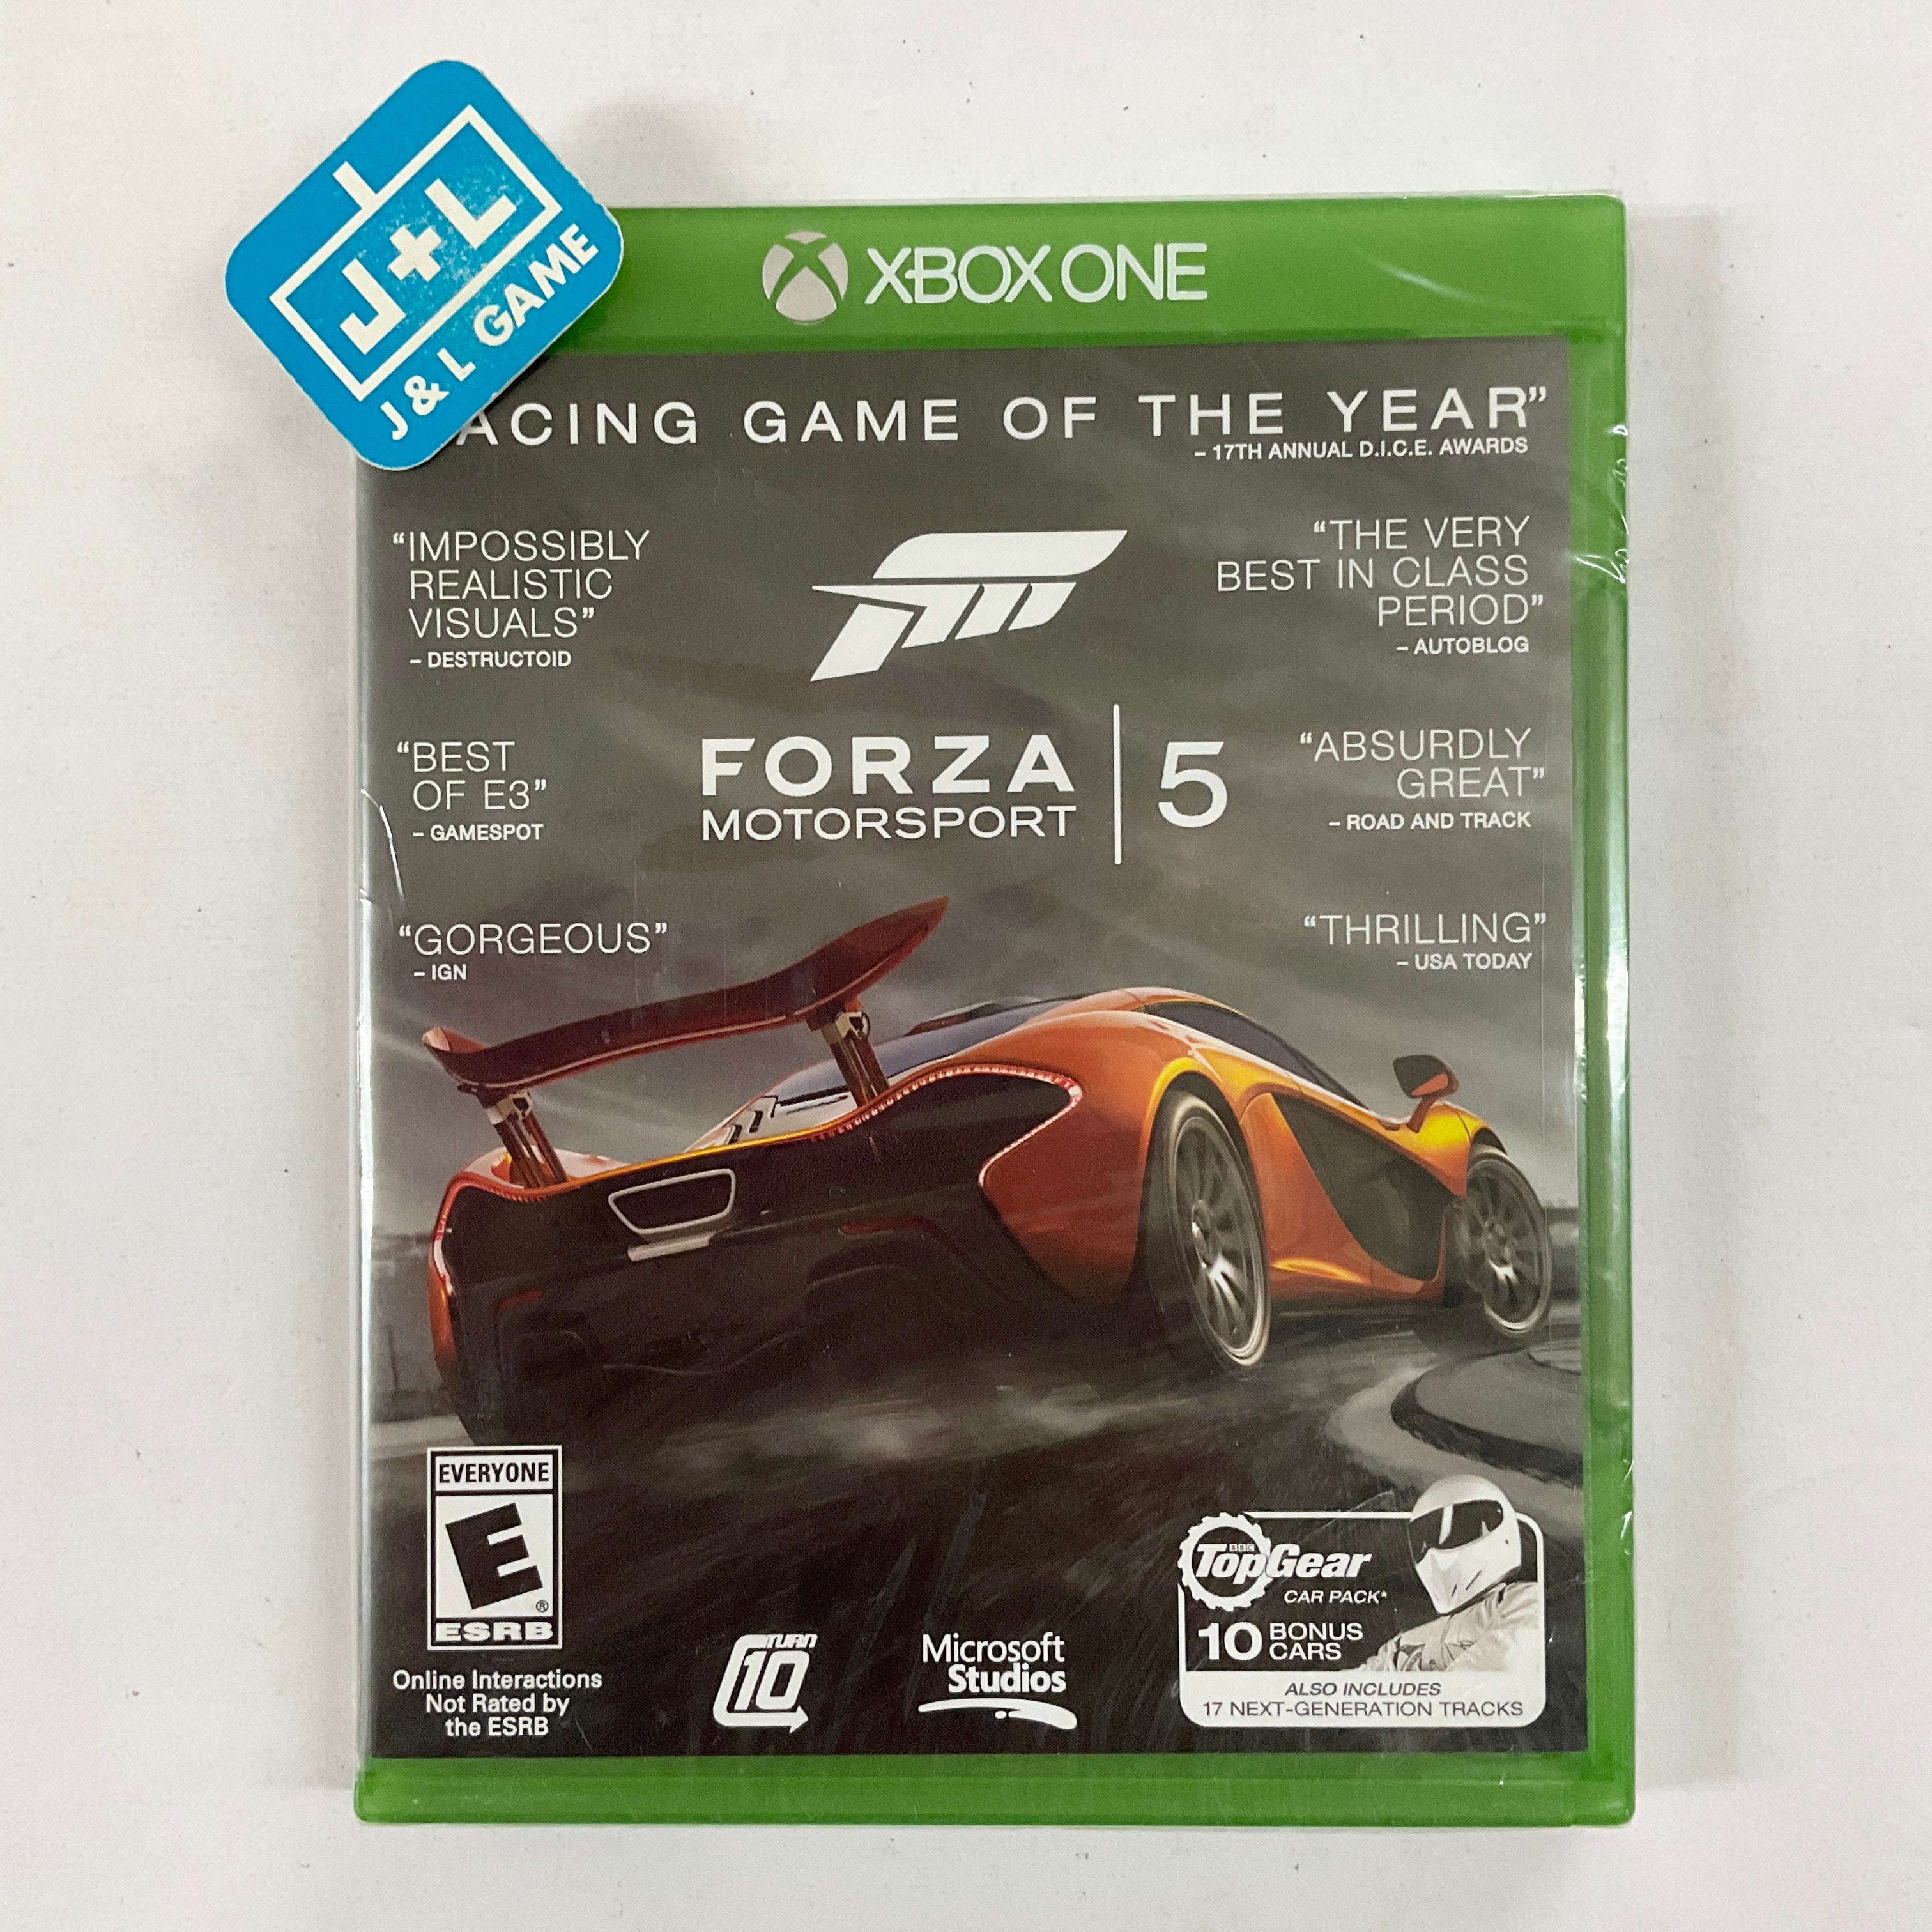 Forza Motorsport 5 (Racing Game of the Year Edition) - (XB1) Xbox One Video Games Microsoft Game Studios   